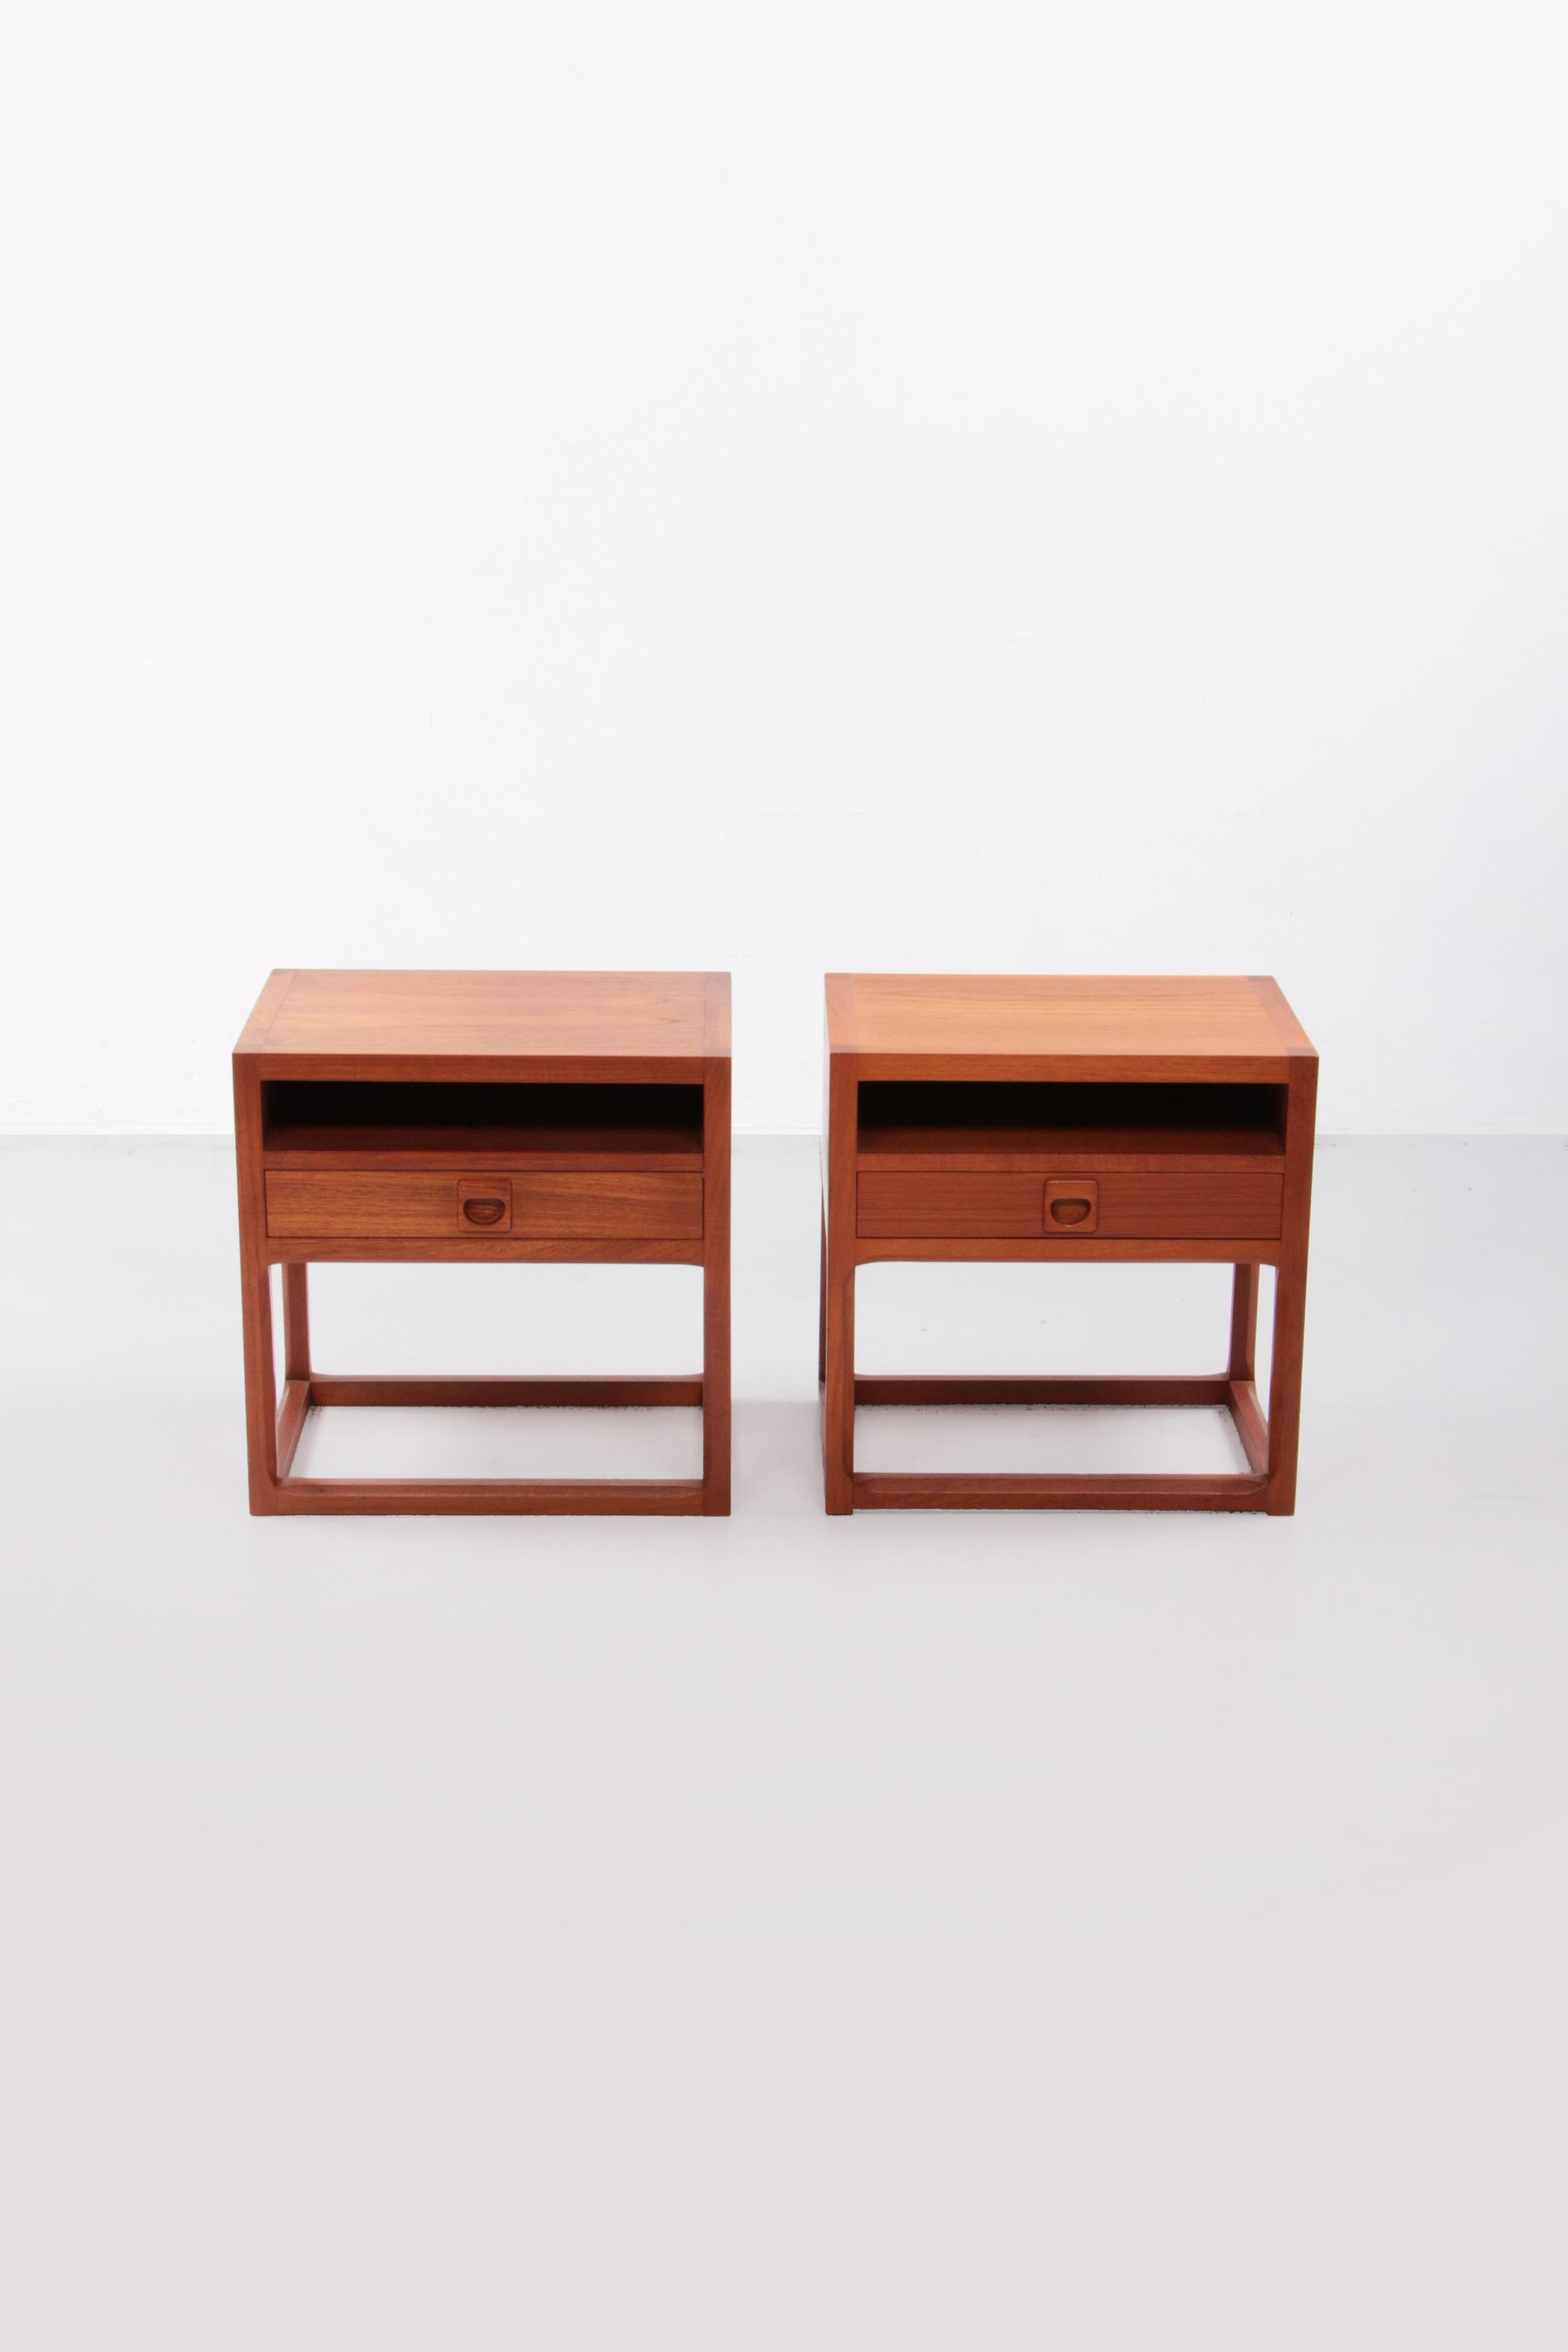 Aksel Kjersgaard Set of 2 bedside tables 1960 Denmark.


This is a rare set of two bedside tables designed by Aksel Kjersgaard.

Made in 1960 in Denmark from teak wood.

A beautifully shaped set with the well-known round finish of Aksel